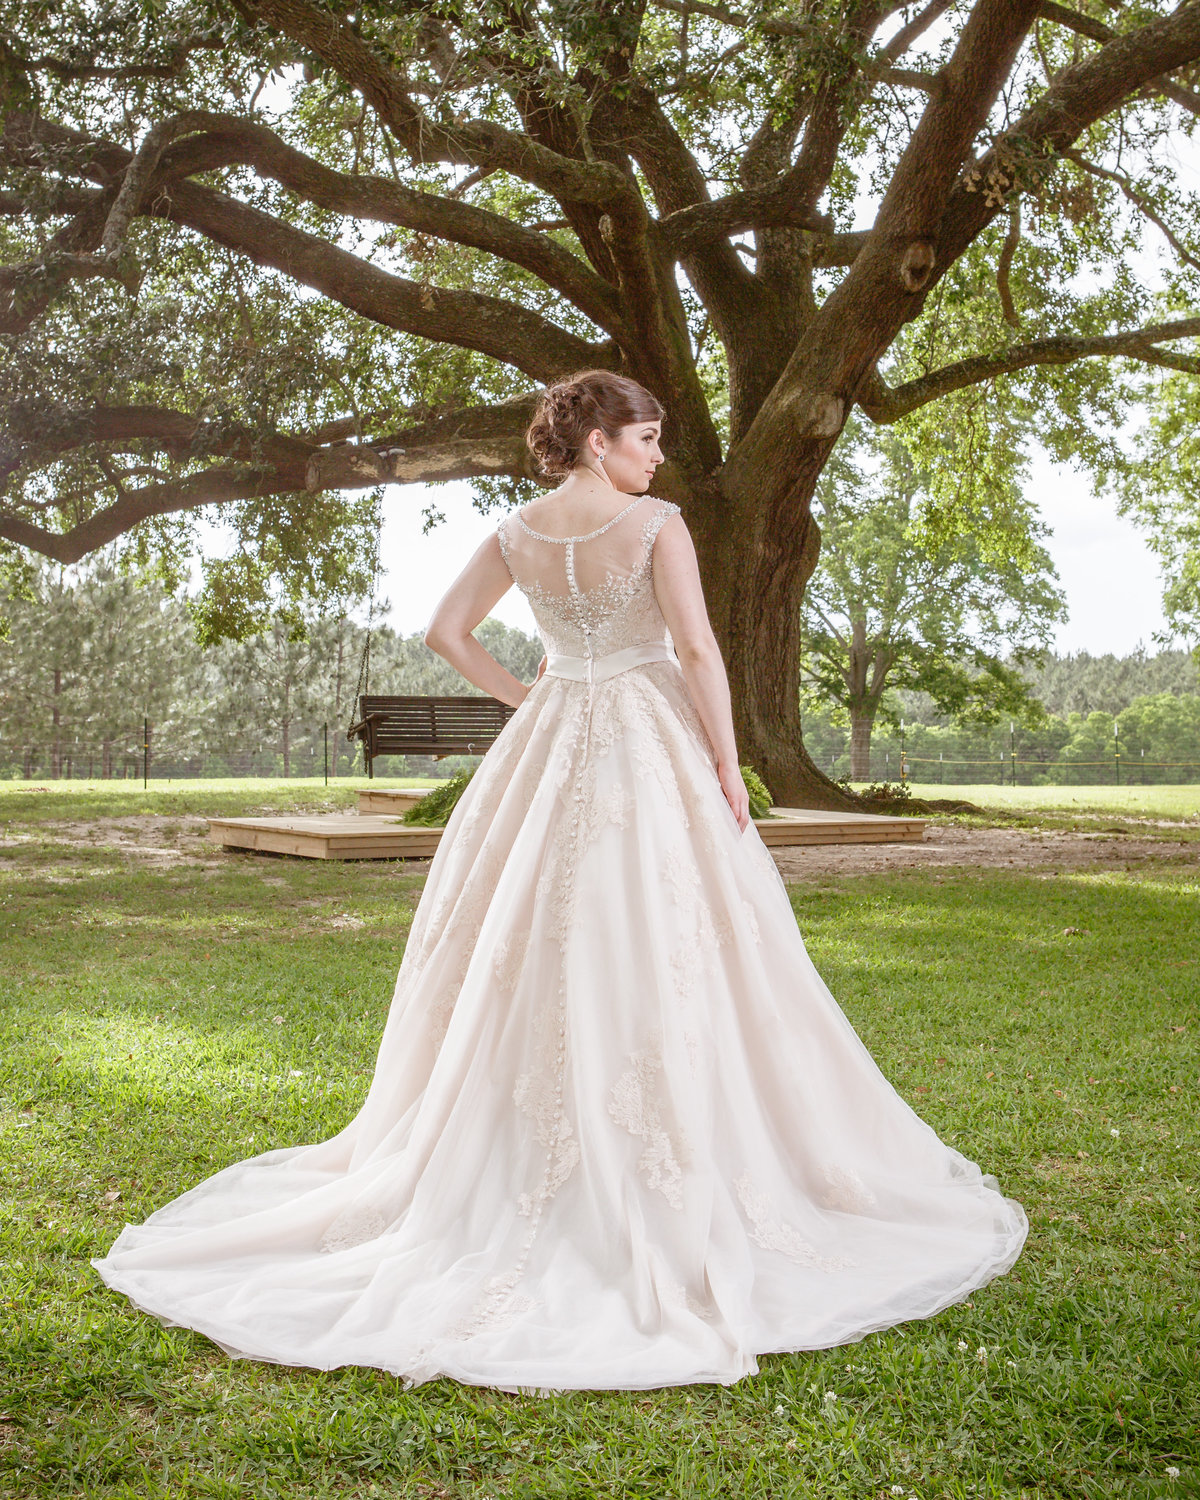 Carlyn Mothershed bridal photo at her home in Foley, Alabama.